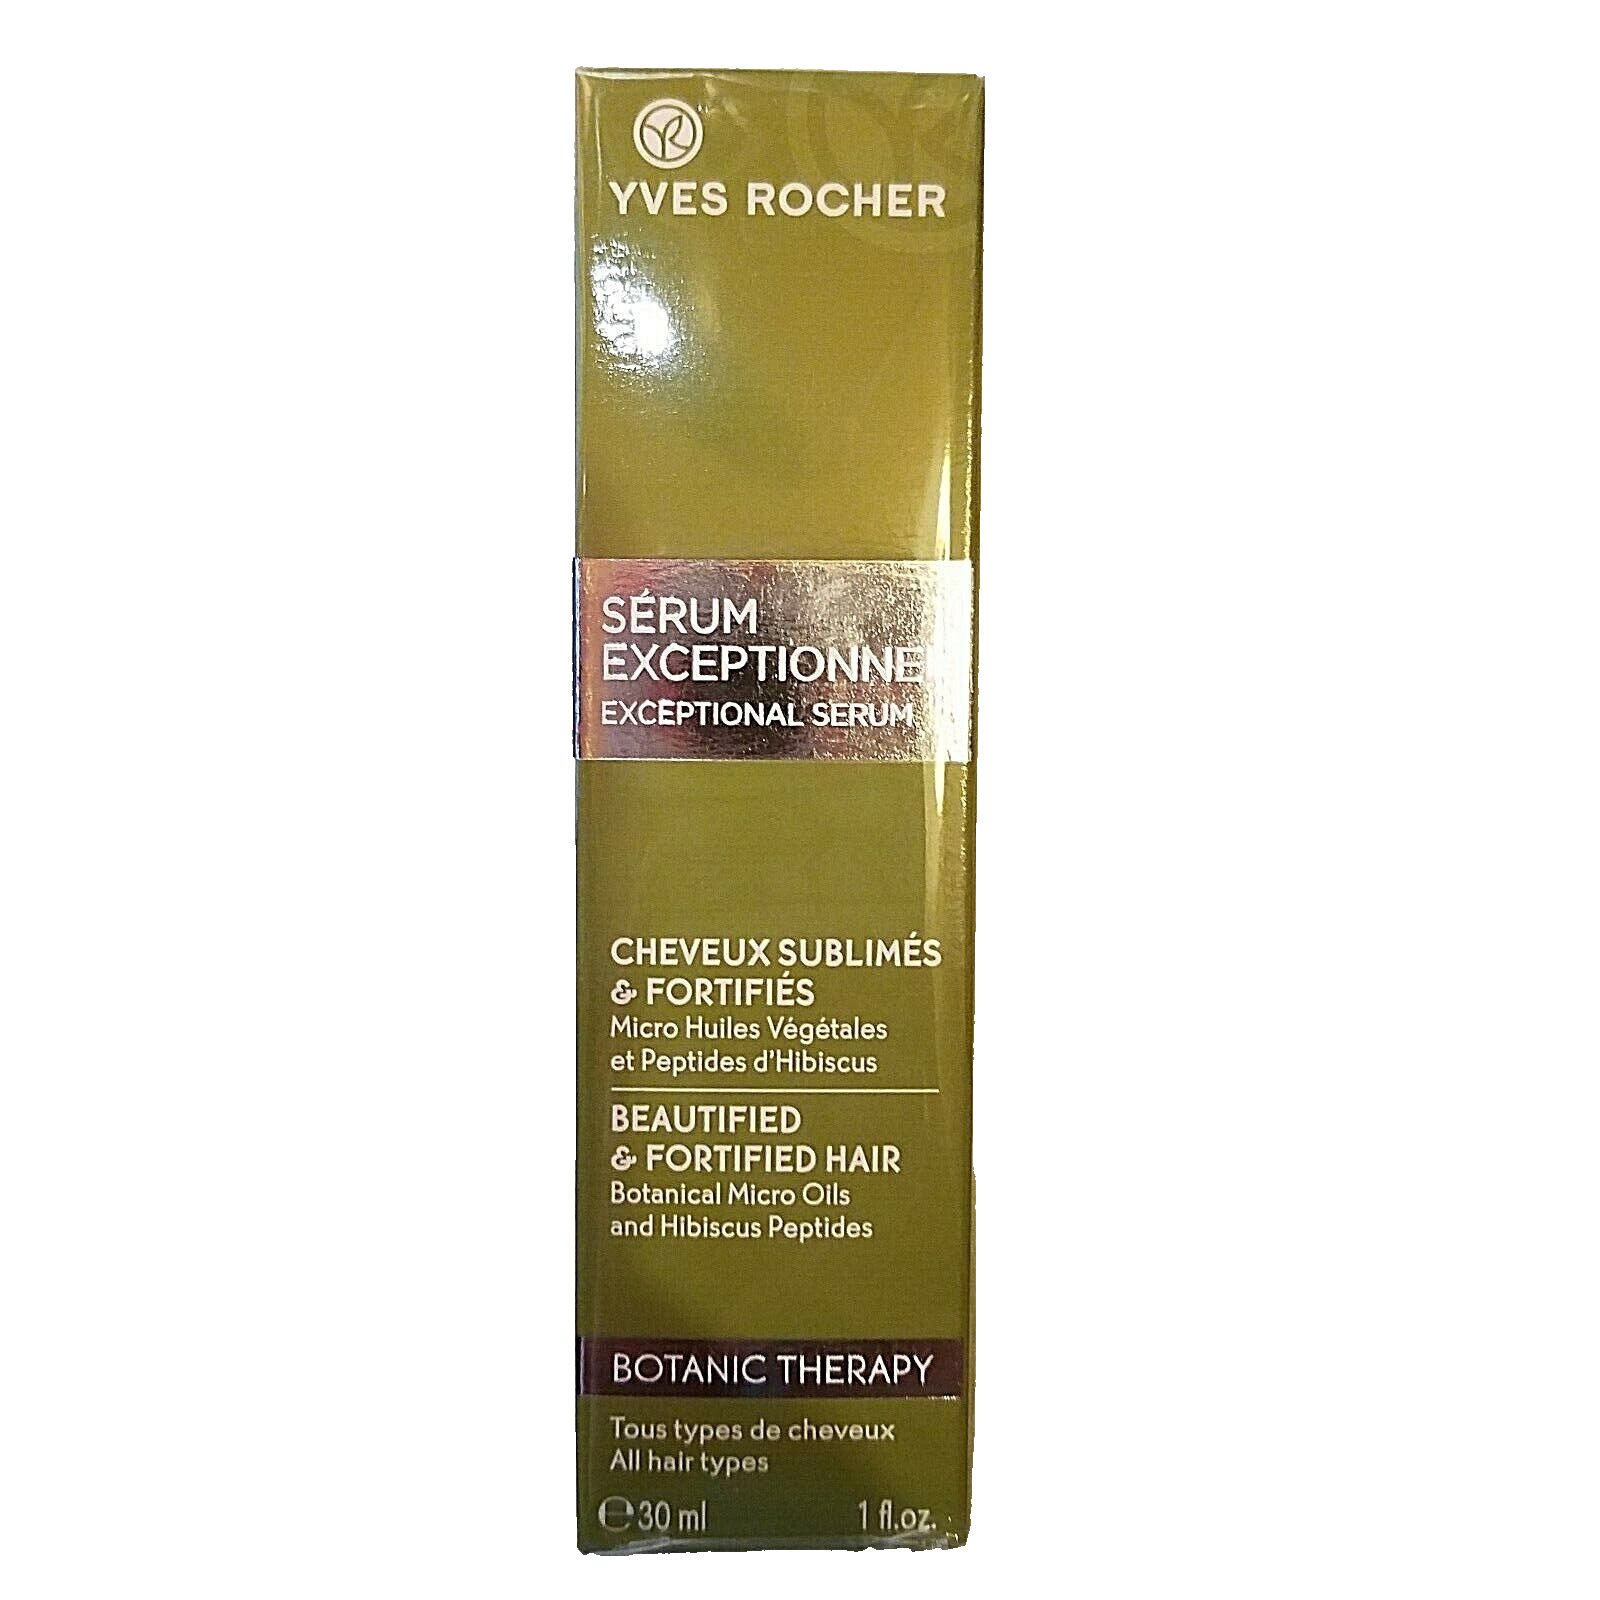 Yves Rocher EXCEPTIONAL SERUM Botanic Therapy for Hair 1 fl oz Pump DISCONTINUED